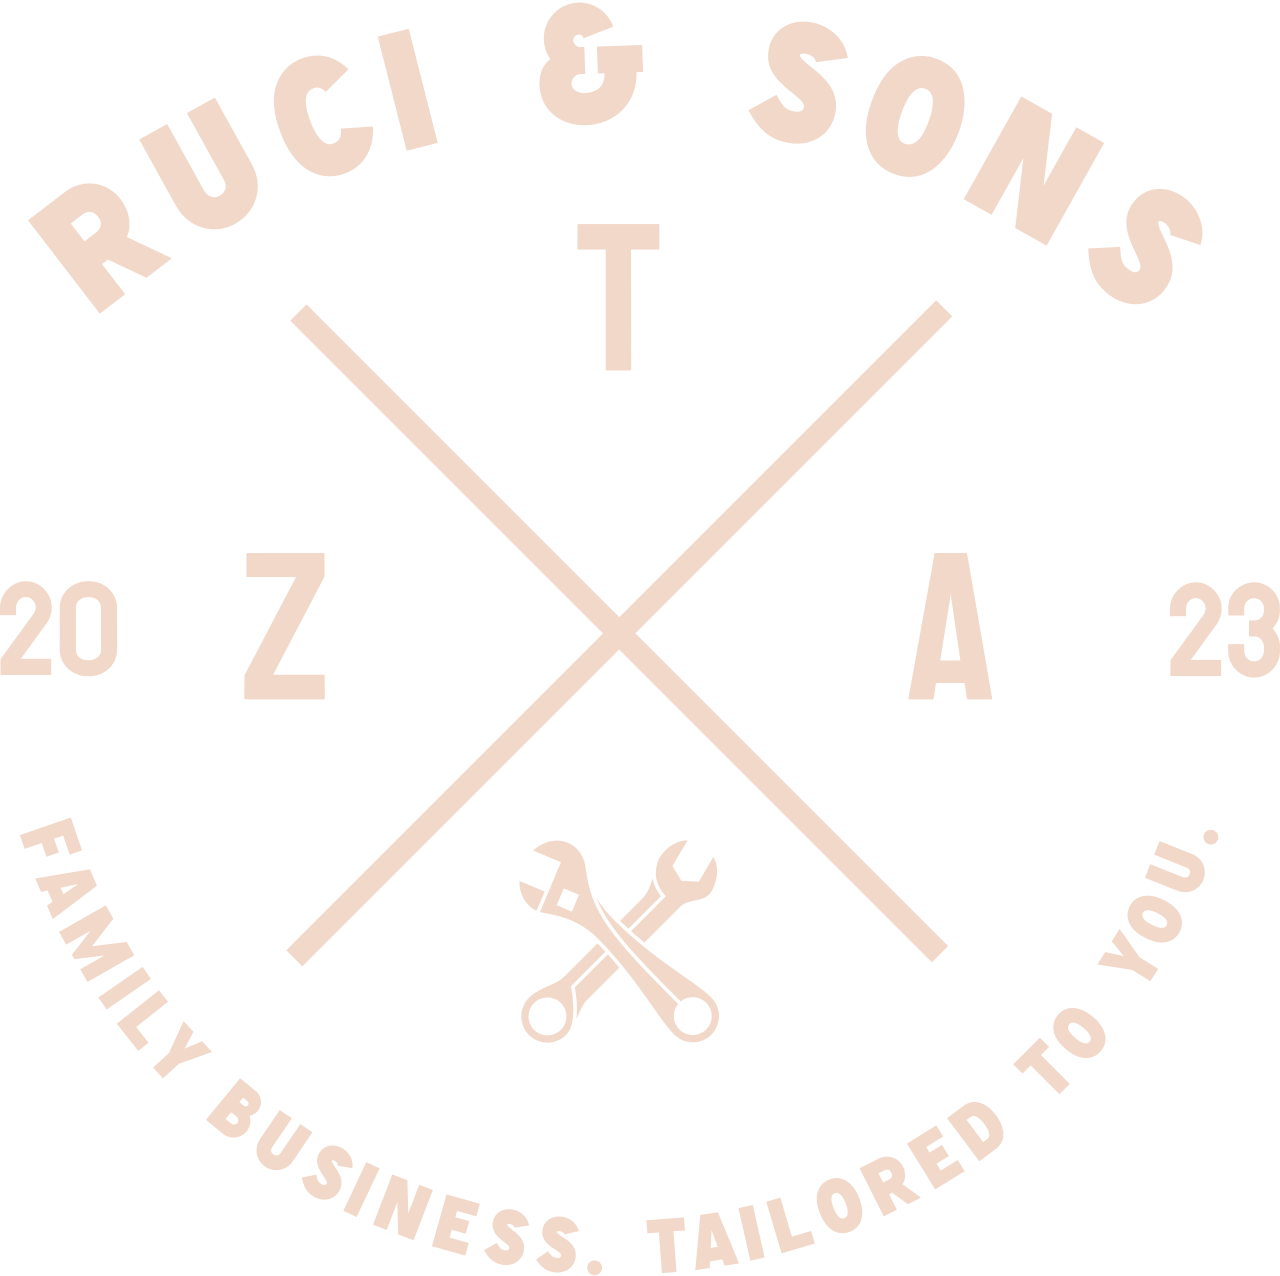 RUCI & sons's web page